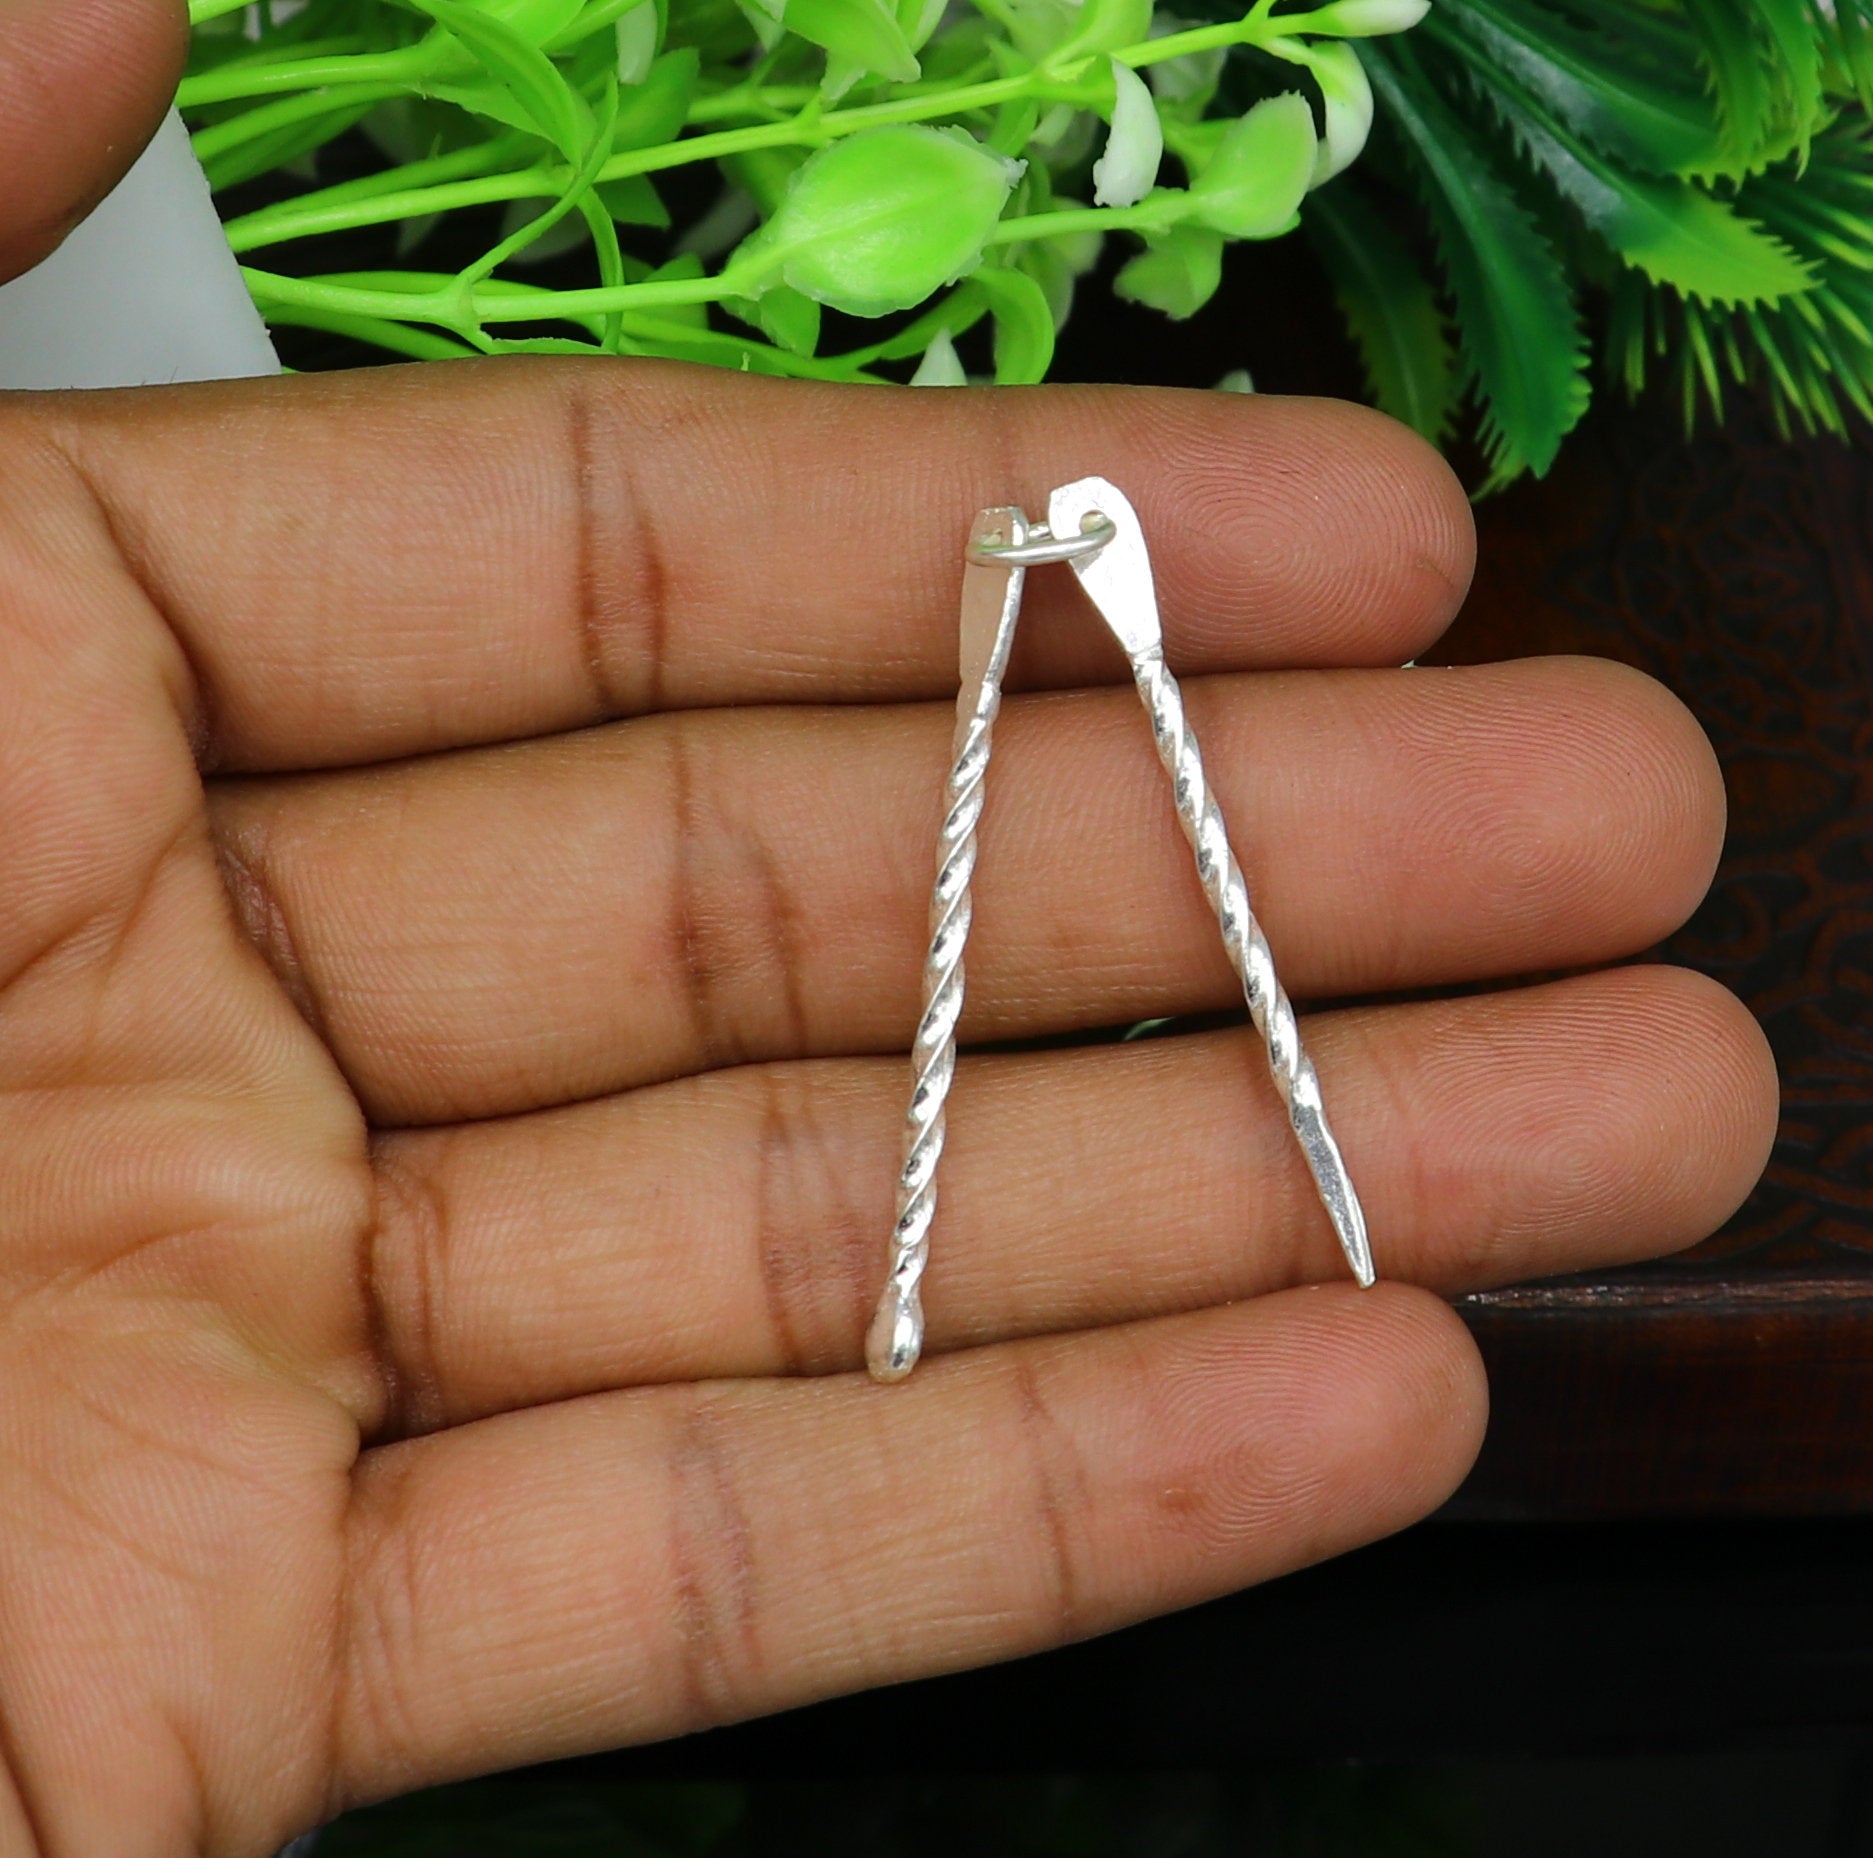 Solid silver toothpick and ear cleaner, Silver is Anti-Microbial, Anti-Allergic, Anti-Septic Silver is the best metal for personal safety - TRIBAL ORNAMENTS